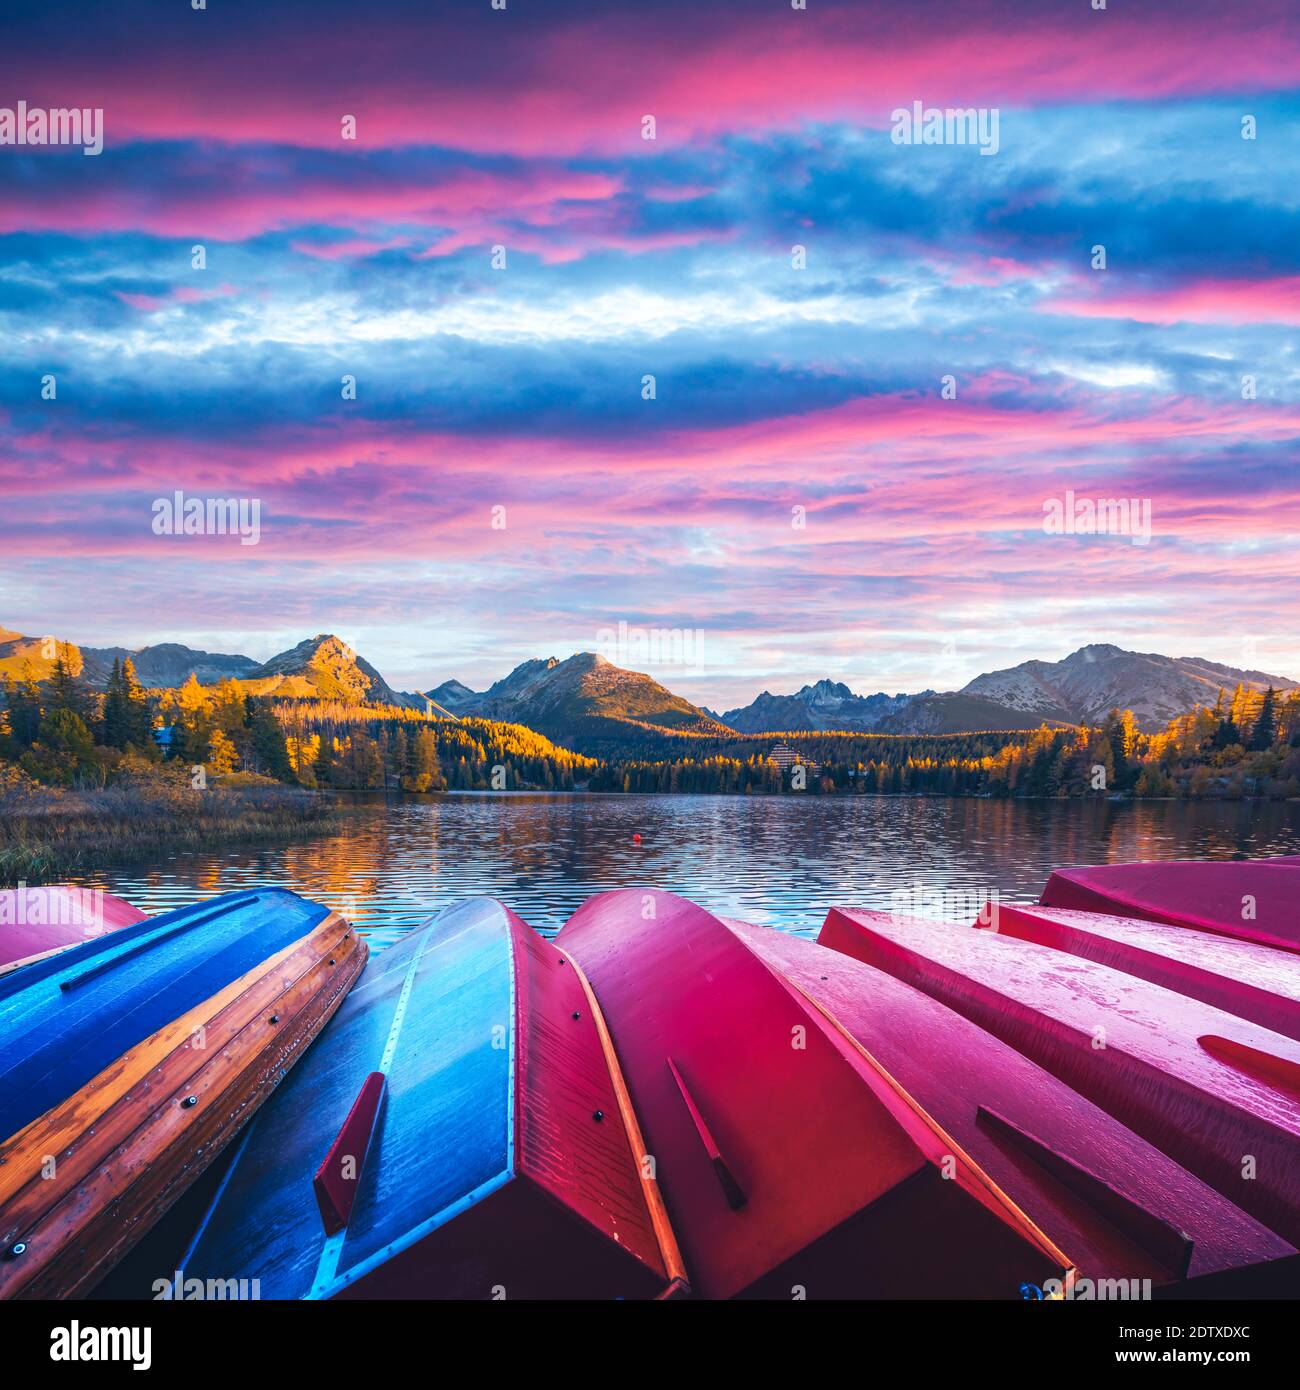 Picturesque autumn view of lake Strbske pleso in High Tatras National Park, Slovakia. Row of red wooden boats and high mountains on background. Landscape photography Stock Photo